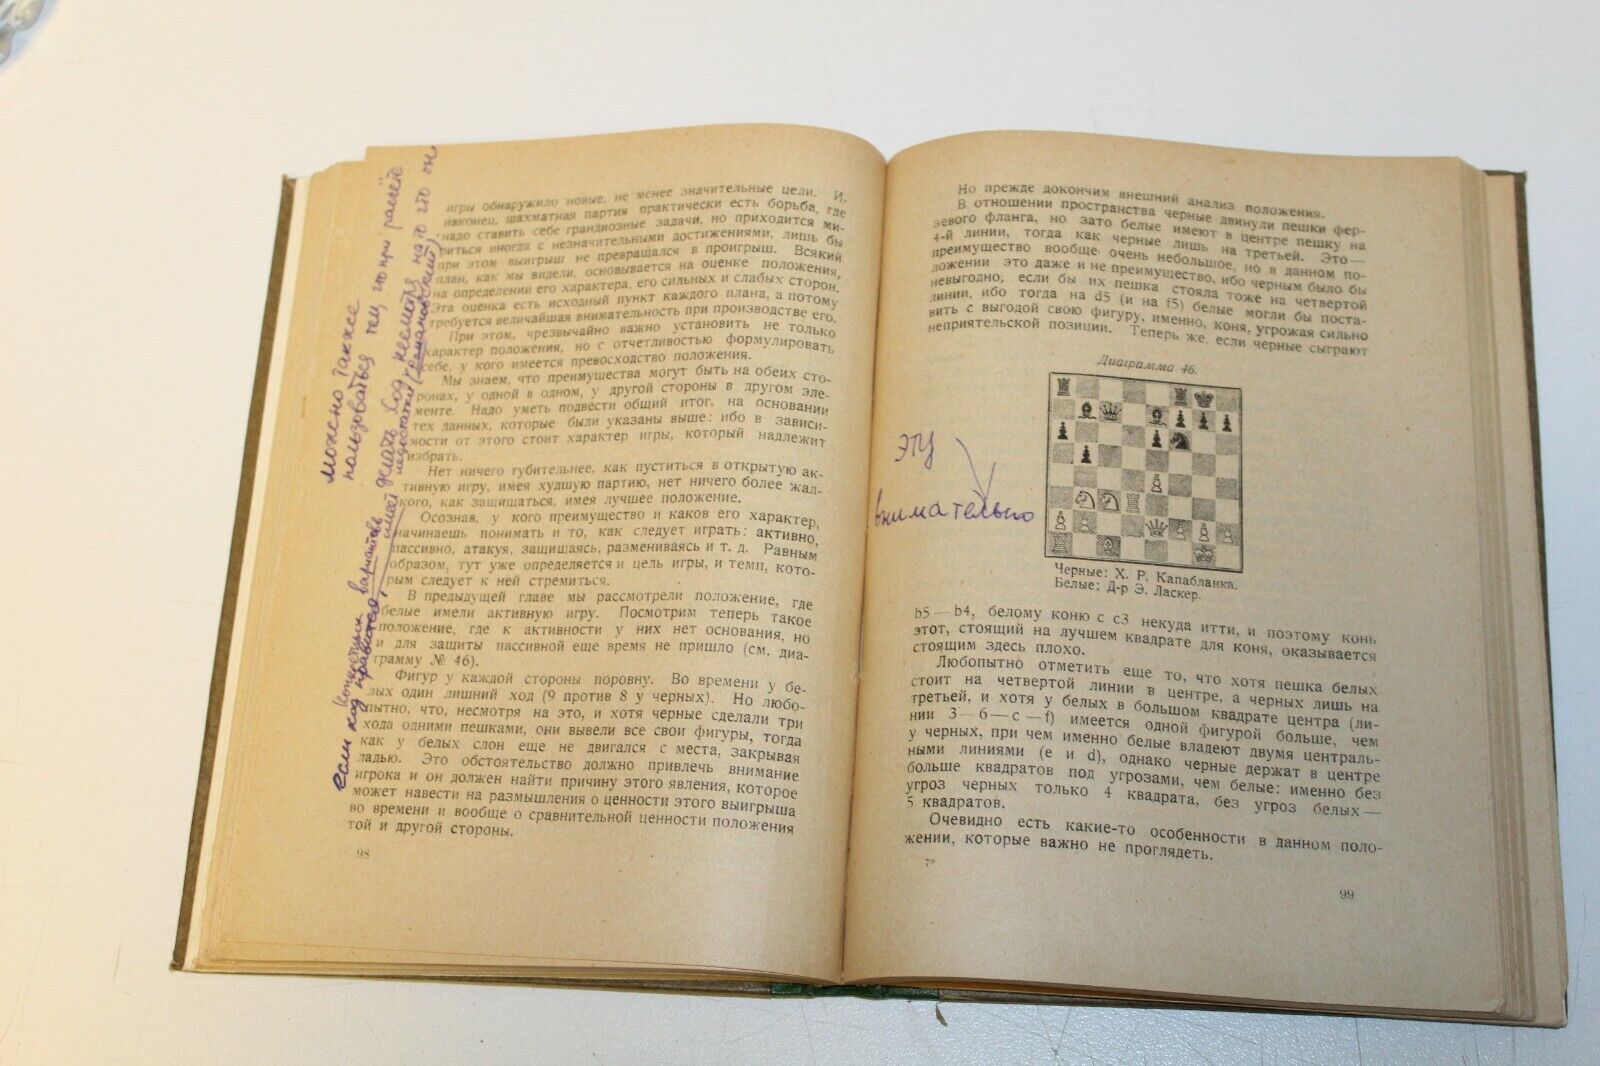 10851.Antique Russian Chess Book. Znosko-Borovsky The theory of the middle game. 1925